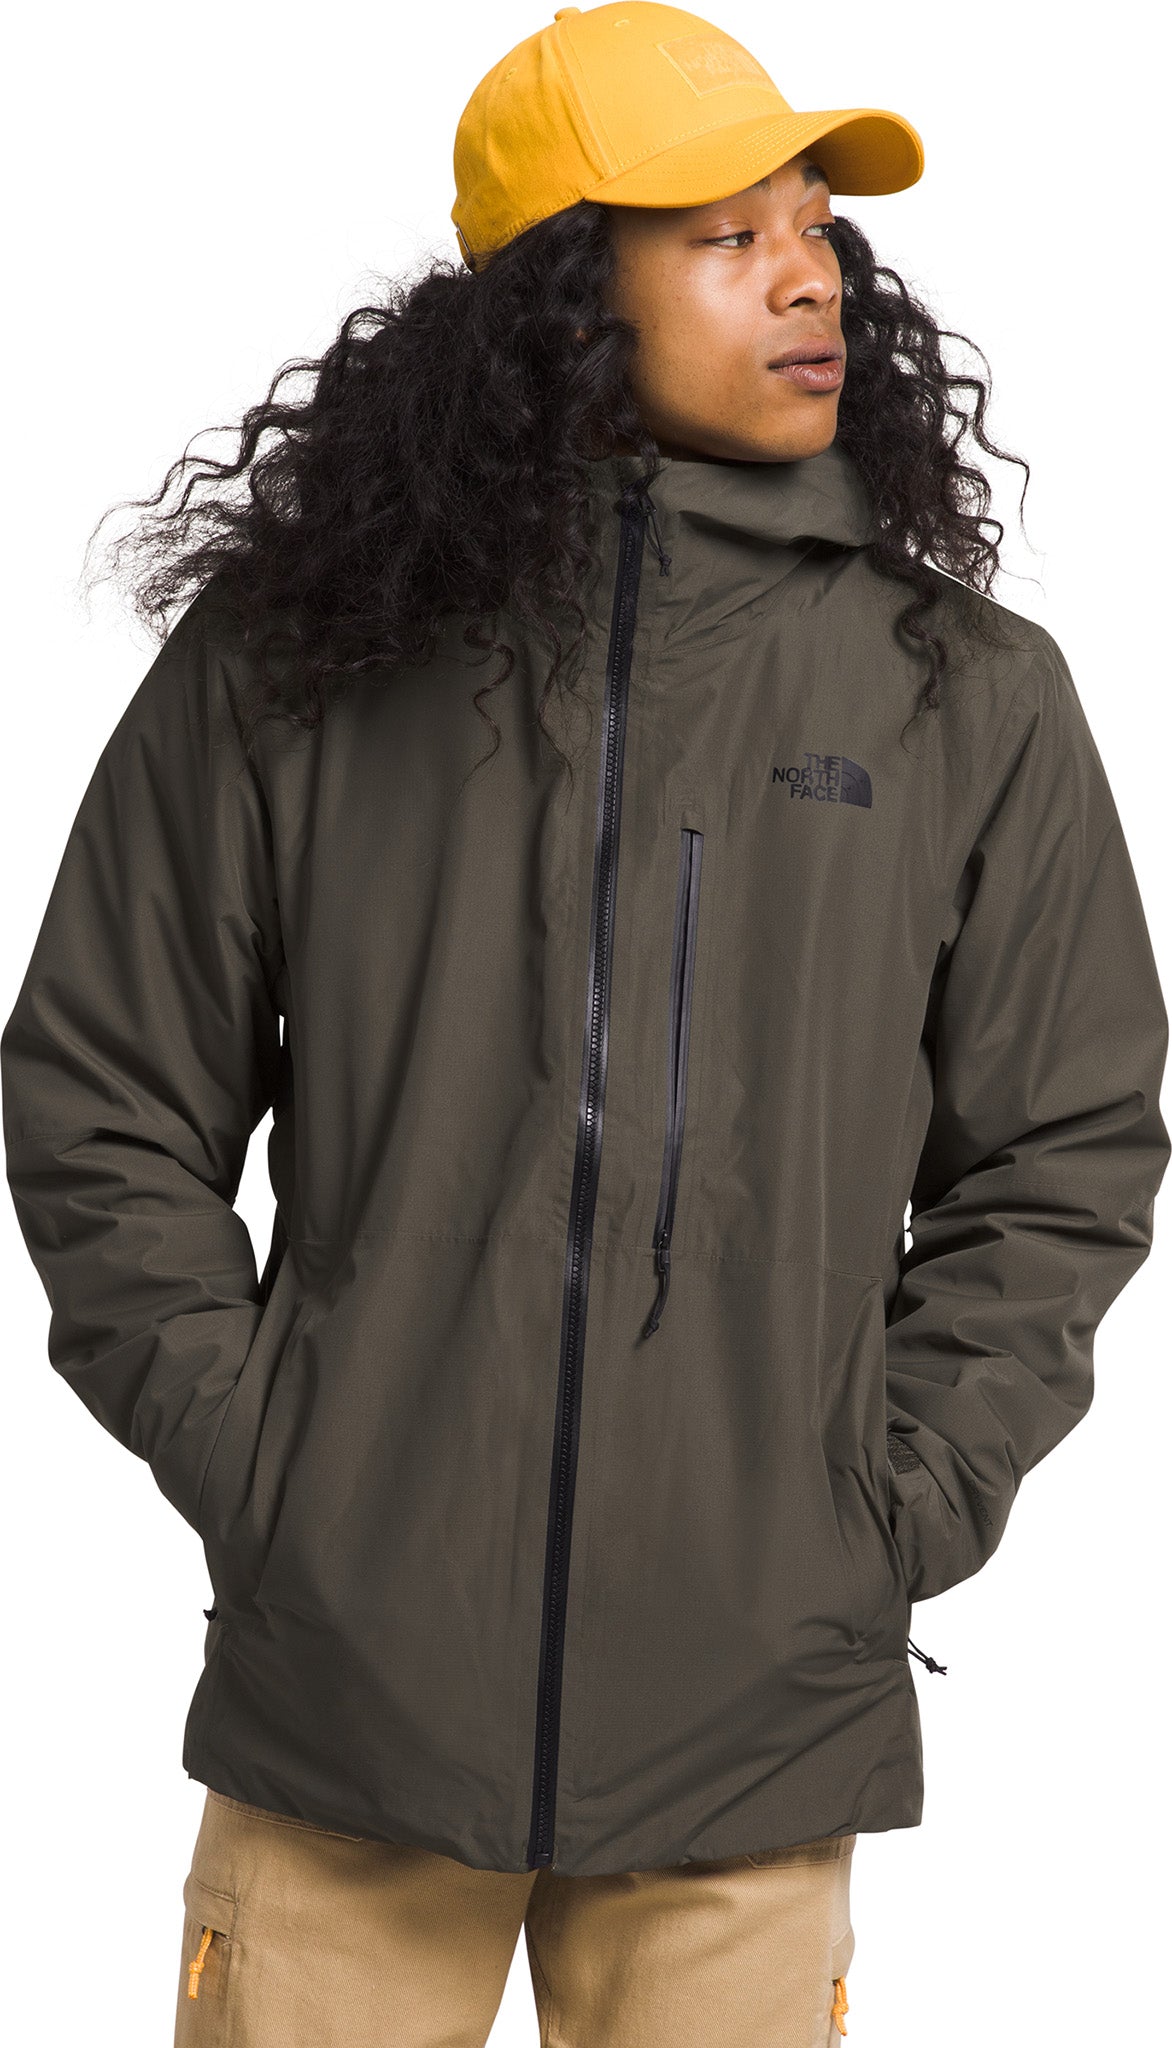 The North Face North Table Down Triclimate Jacket - Men's